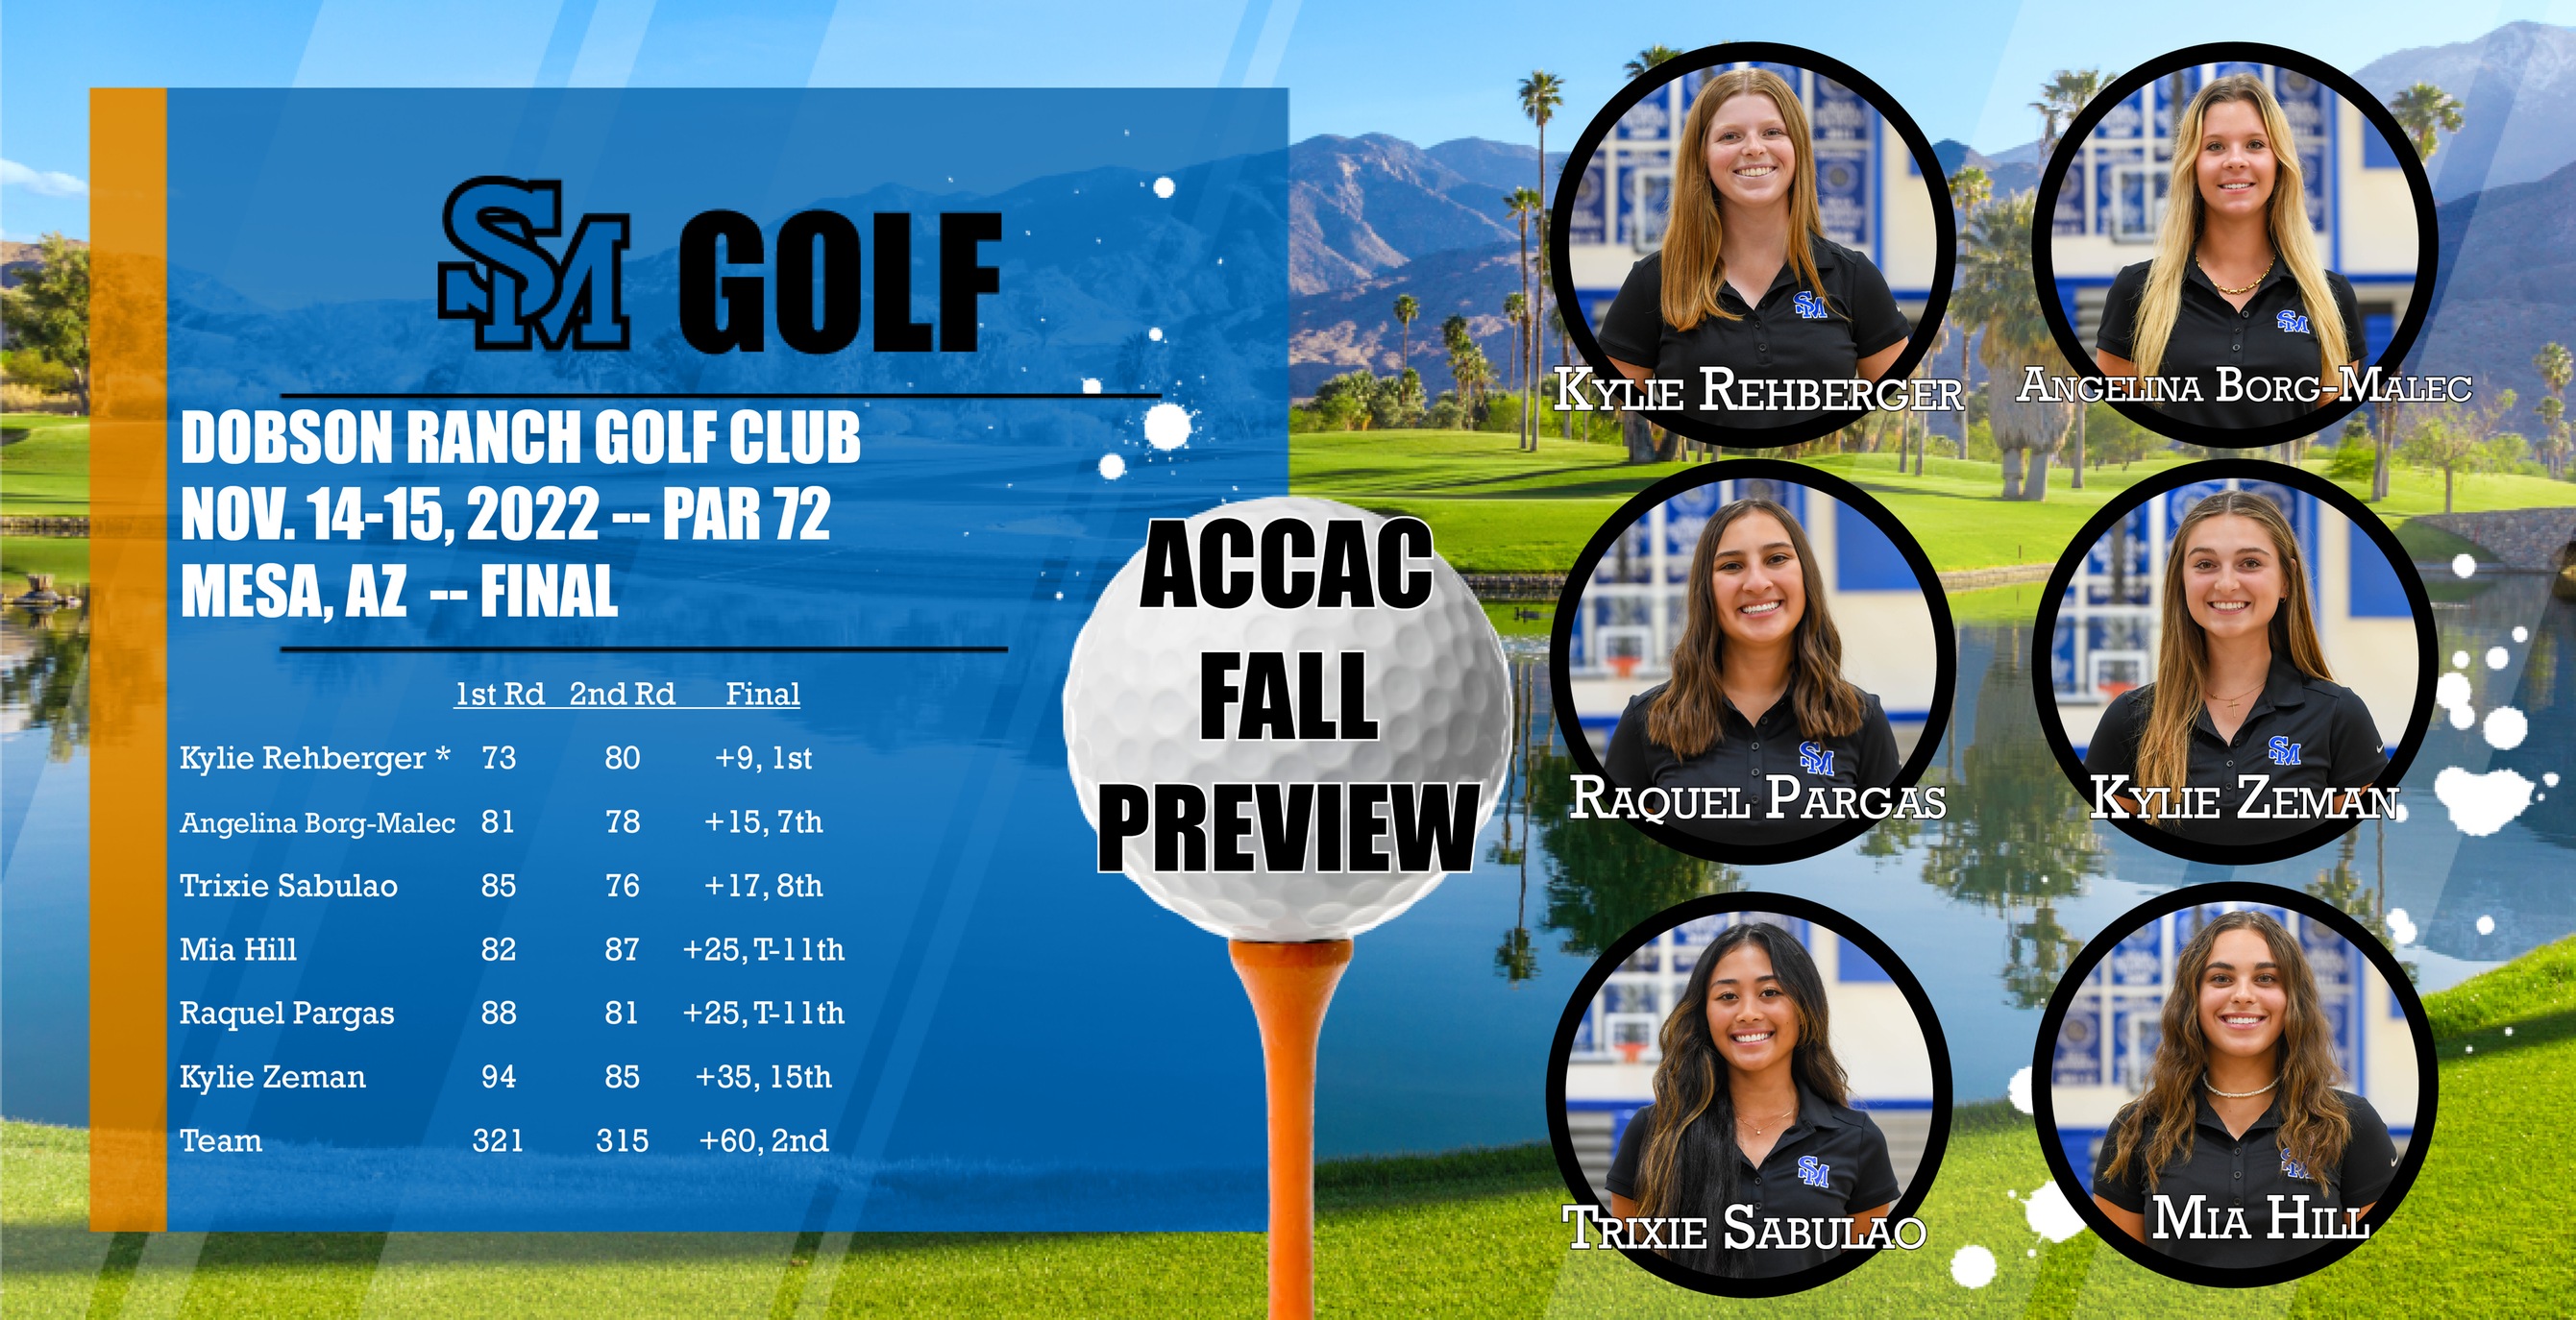 SMCC Women's Golf Sophomore Kylie Rehberger Wins ACCAC Fall Preview